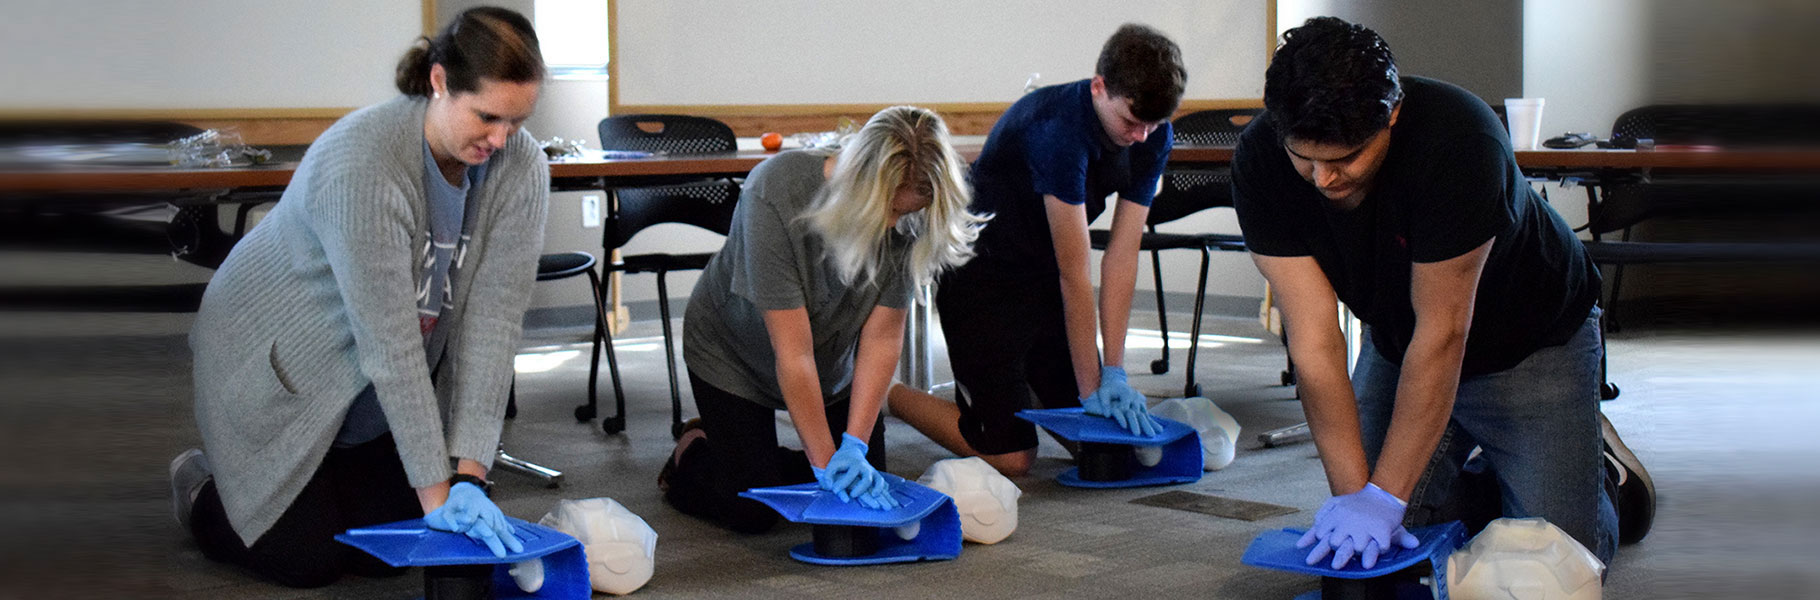 CPR class students practicing on dummies